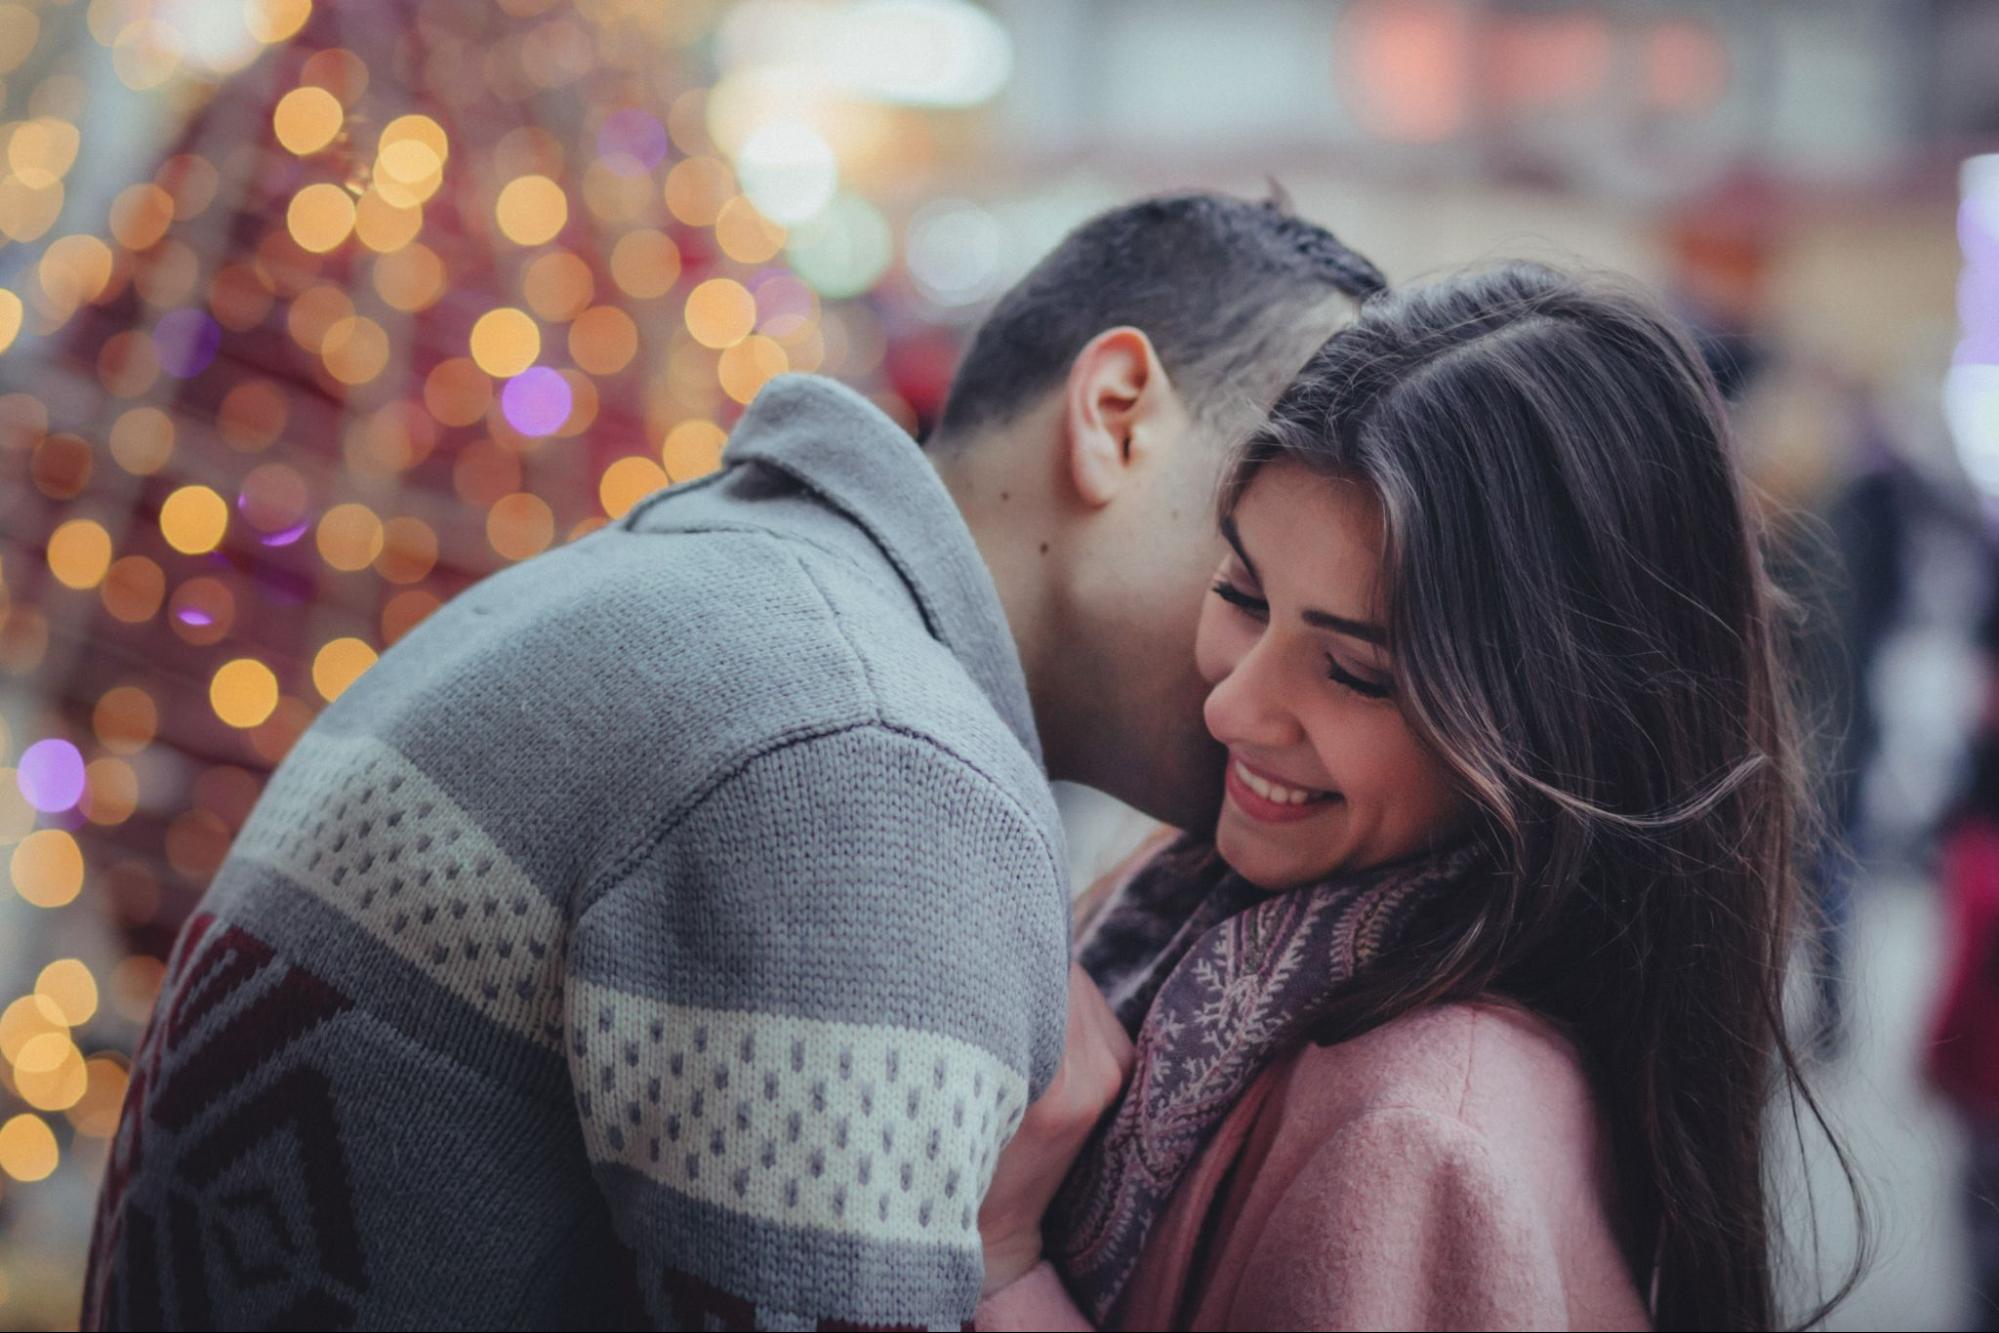 A couple celebrates their anniversary with a public kiss during wintertime.